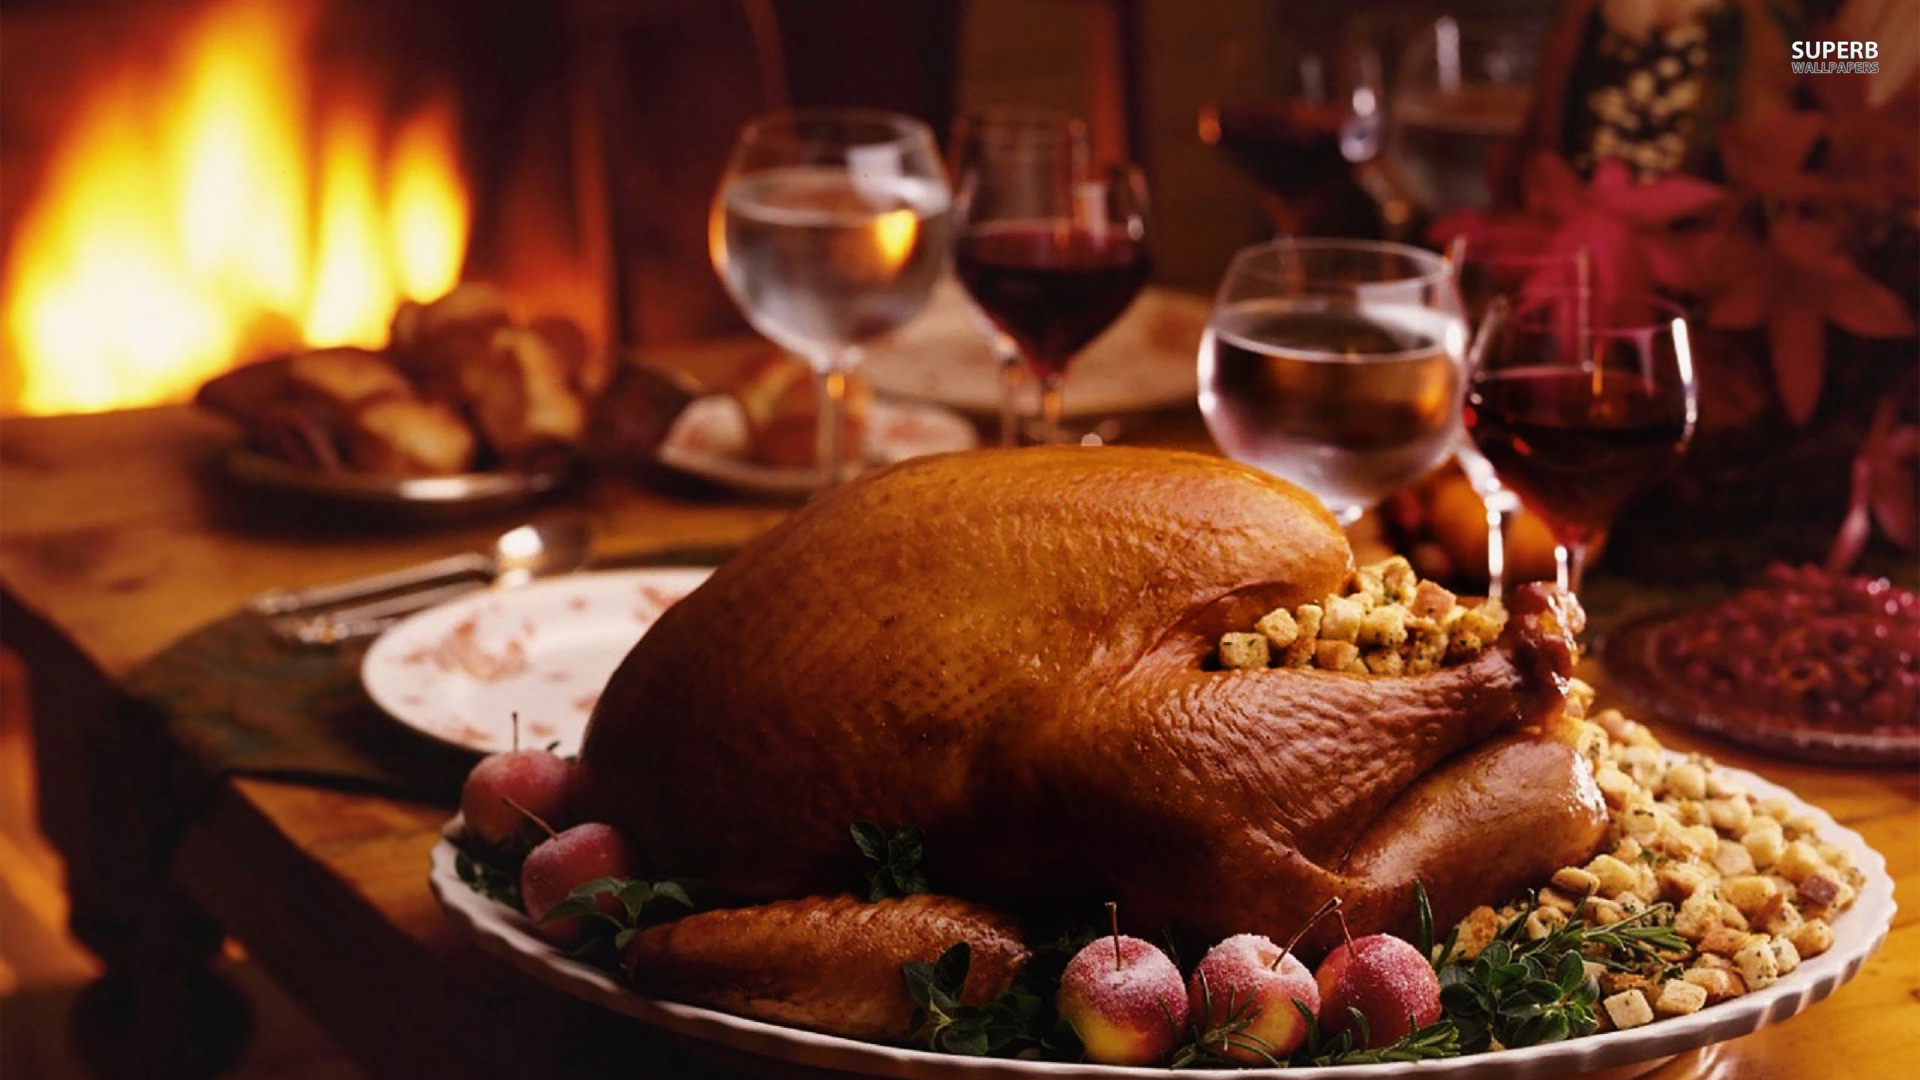 1920x1080 Top 15+ Images for 1080p Thanksgiving Wallpaper | Image No: 12. File Type